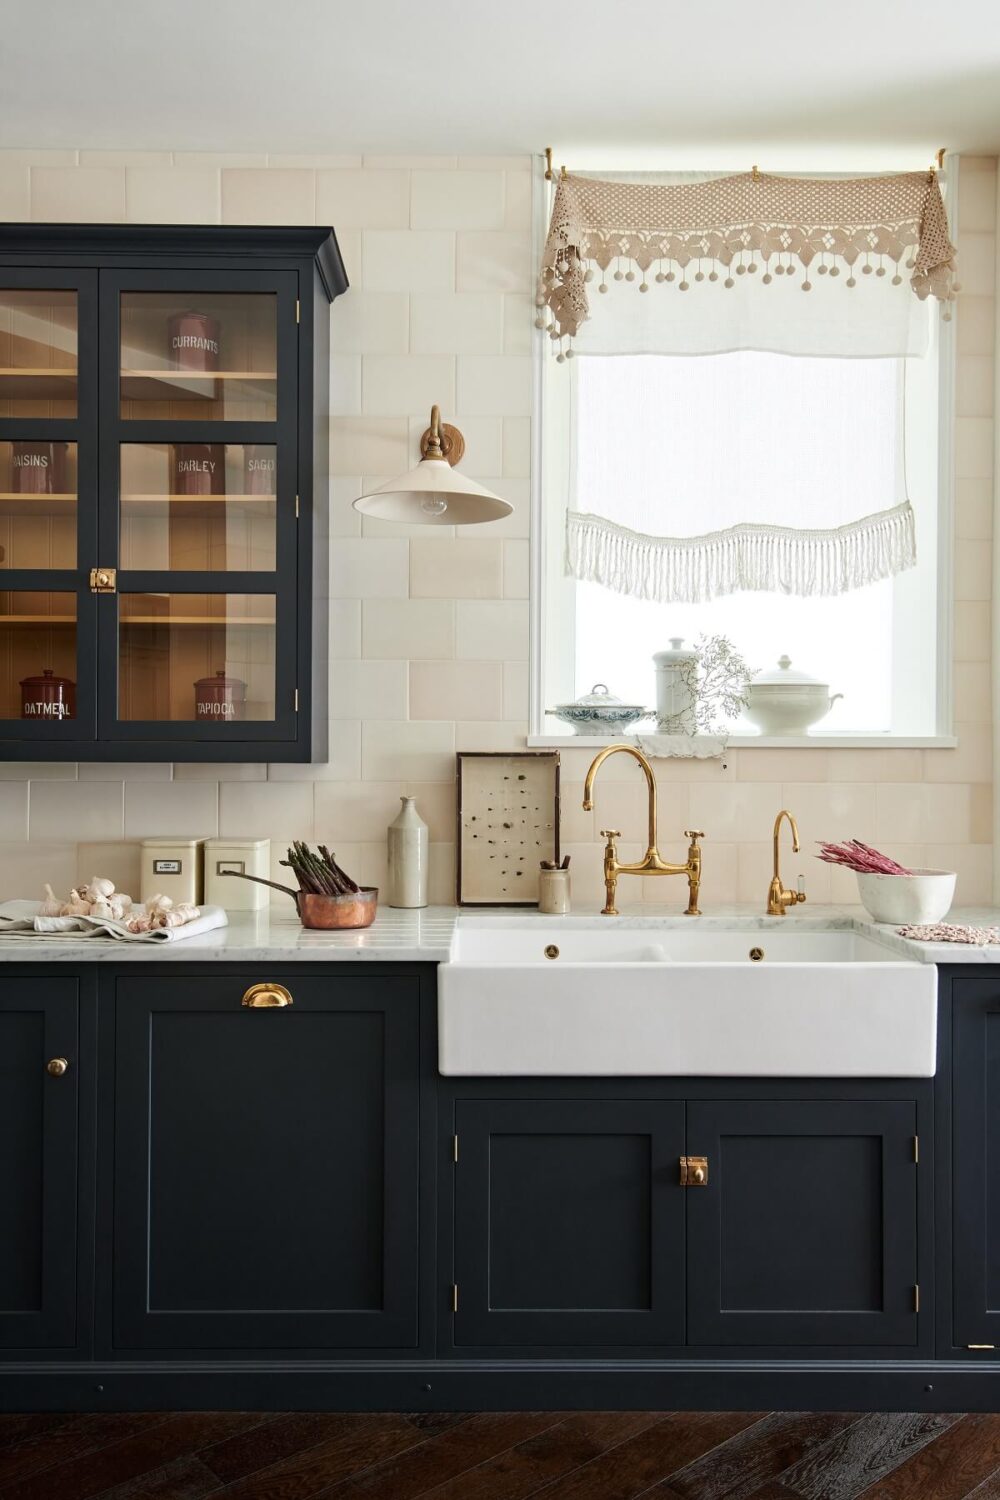 6.TheRealShakerKitchen deVOL LOW RES A Warm Makeover For A deVOL Shaker Kitchen